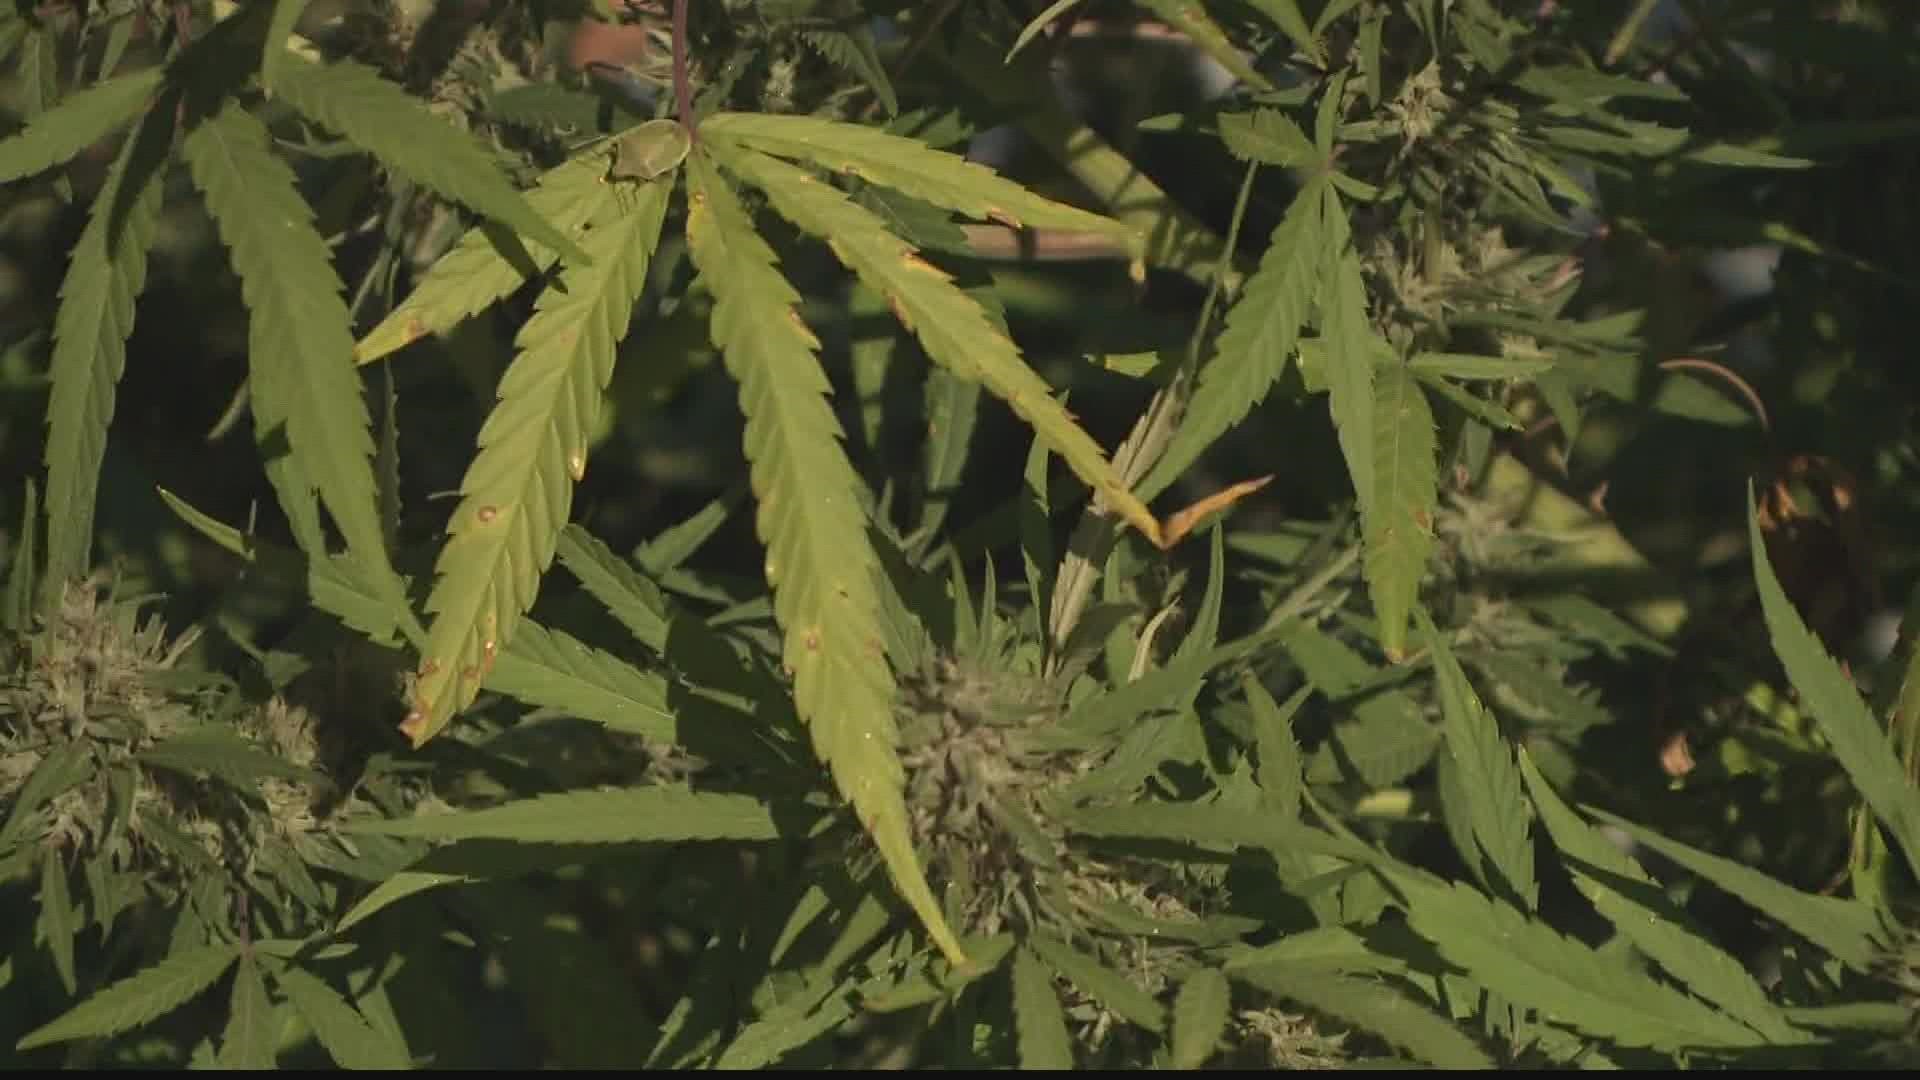 The new ordinance would make having an ounce or less of weed a ticket.